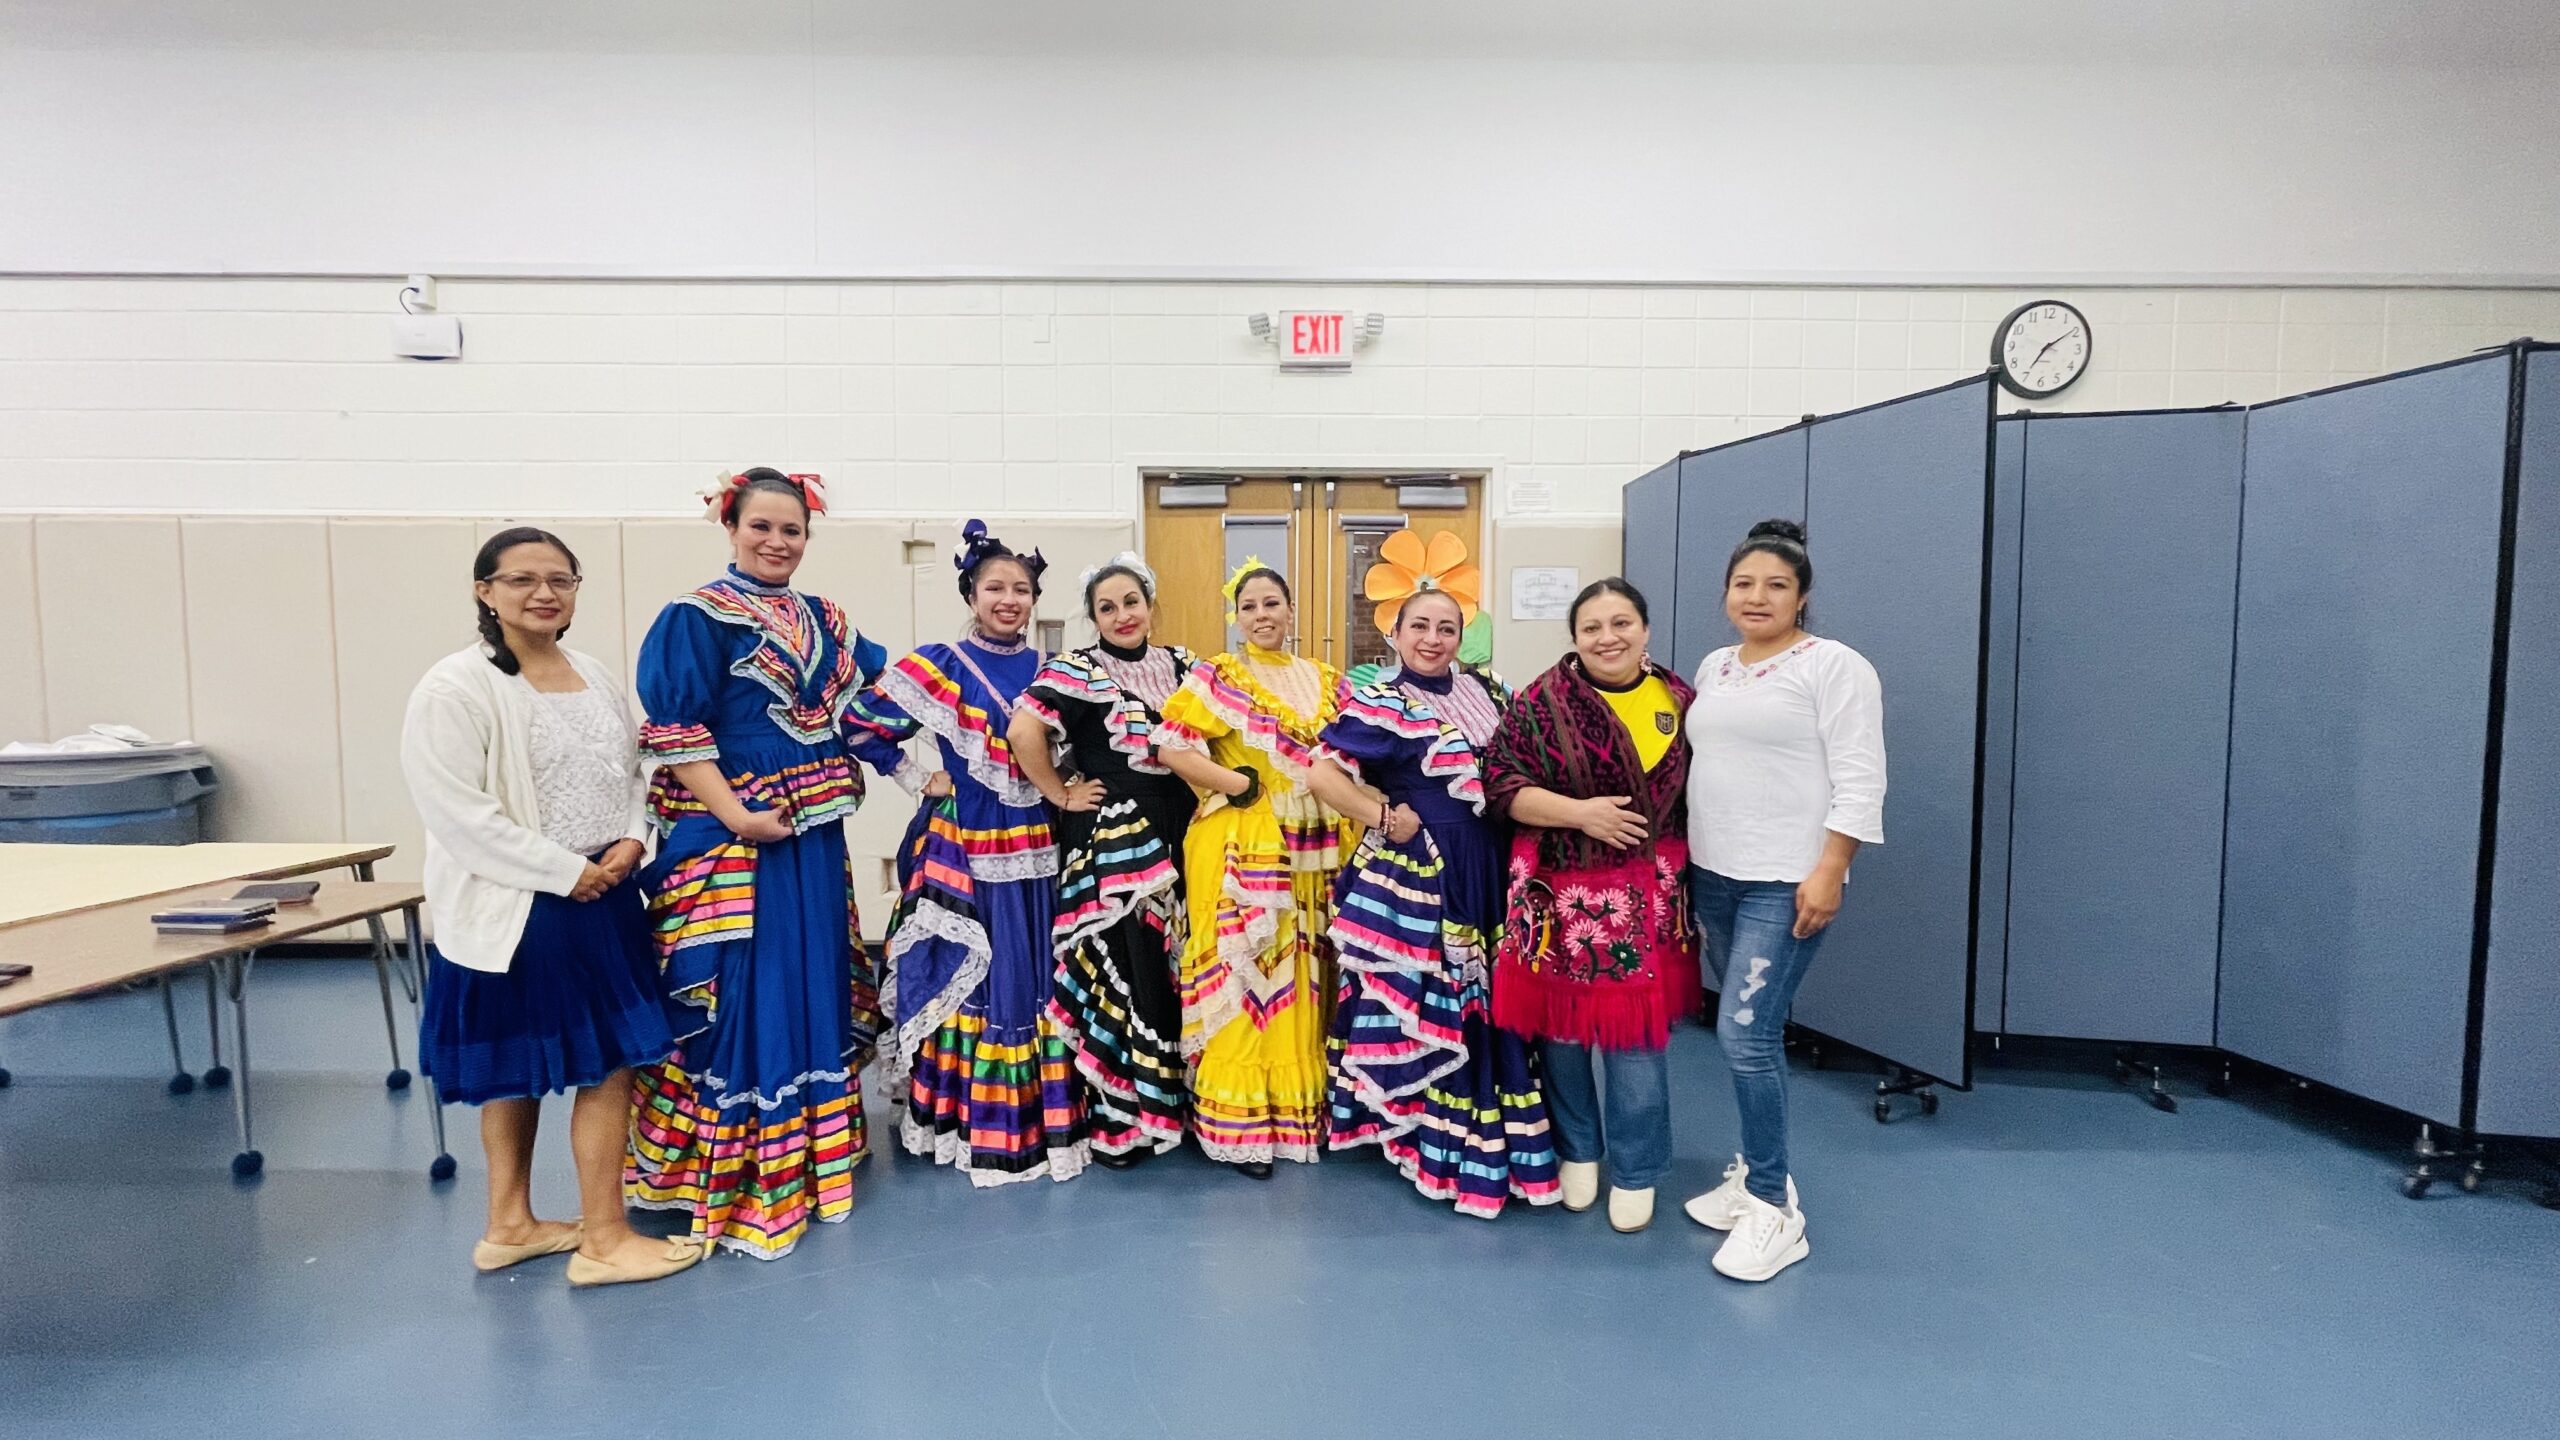 Southampton Intermediate School’s Parent Teacher Organization recently held a Multicultural Night as a way for families to share their cultural backgrounds. The event featured dance acts that highlighted diversity in the school. In addition, students carried paper “passports” to tour the different countries represented at stations set up by families. The stations featured traditional cuisine and information about each family’s culture. COURTESY SOUTHAMPTON SCHOOL DISTRICT